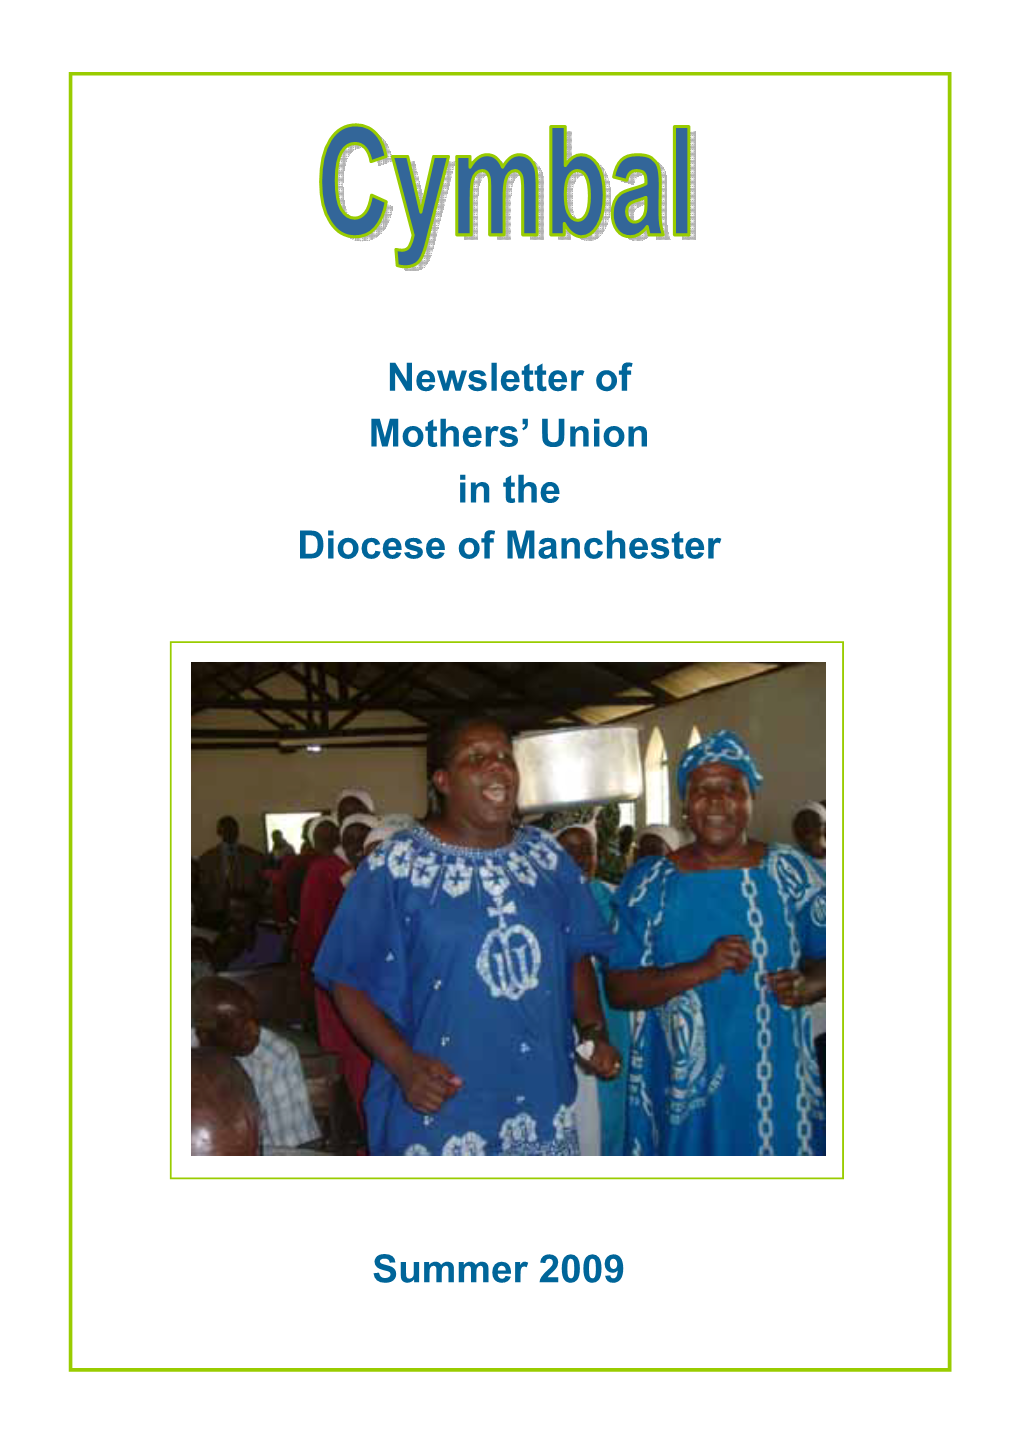 Newsletter of Mothers' Union in the Diocese of Manchester Summer 2009